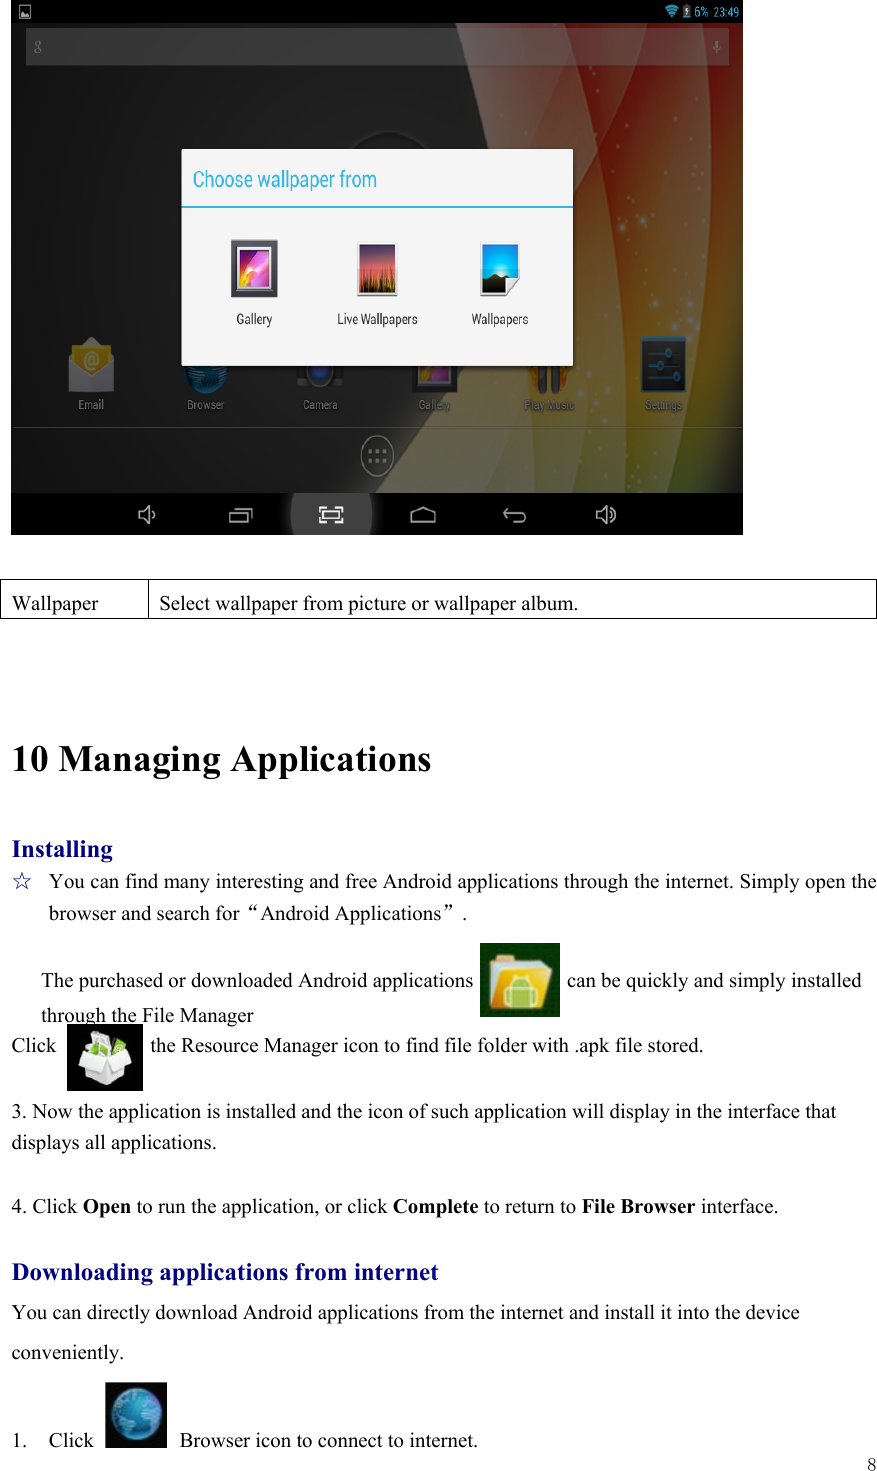  8                     10 Managing Applications Installing ☆  You can find many interesting and free Android applications through the internet. Simply open the browser and search for“Android Applications”.  The purchased or downloaded Android applications                  can be quickly and simply installed through the File Manager       Click         the Resource Manager icon to find file folder with .apk file stored.  3. Now the application is installed and the icon of such application will display in the interface that displays all applications.    4. Click Open to run the application, or click Complete to return to File Browser interface.  Downloading applications from internet You can directly download Android applications from the internet and install it into the device   conveniently.  1. Click   Browser icon to connect to internet.   Wallpaper  Select wallpaper from picture or wallpaper album. 